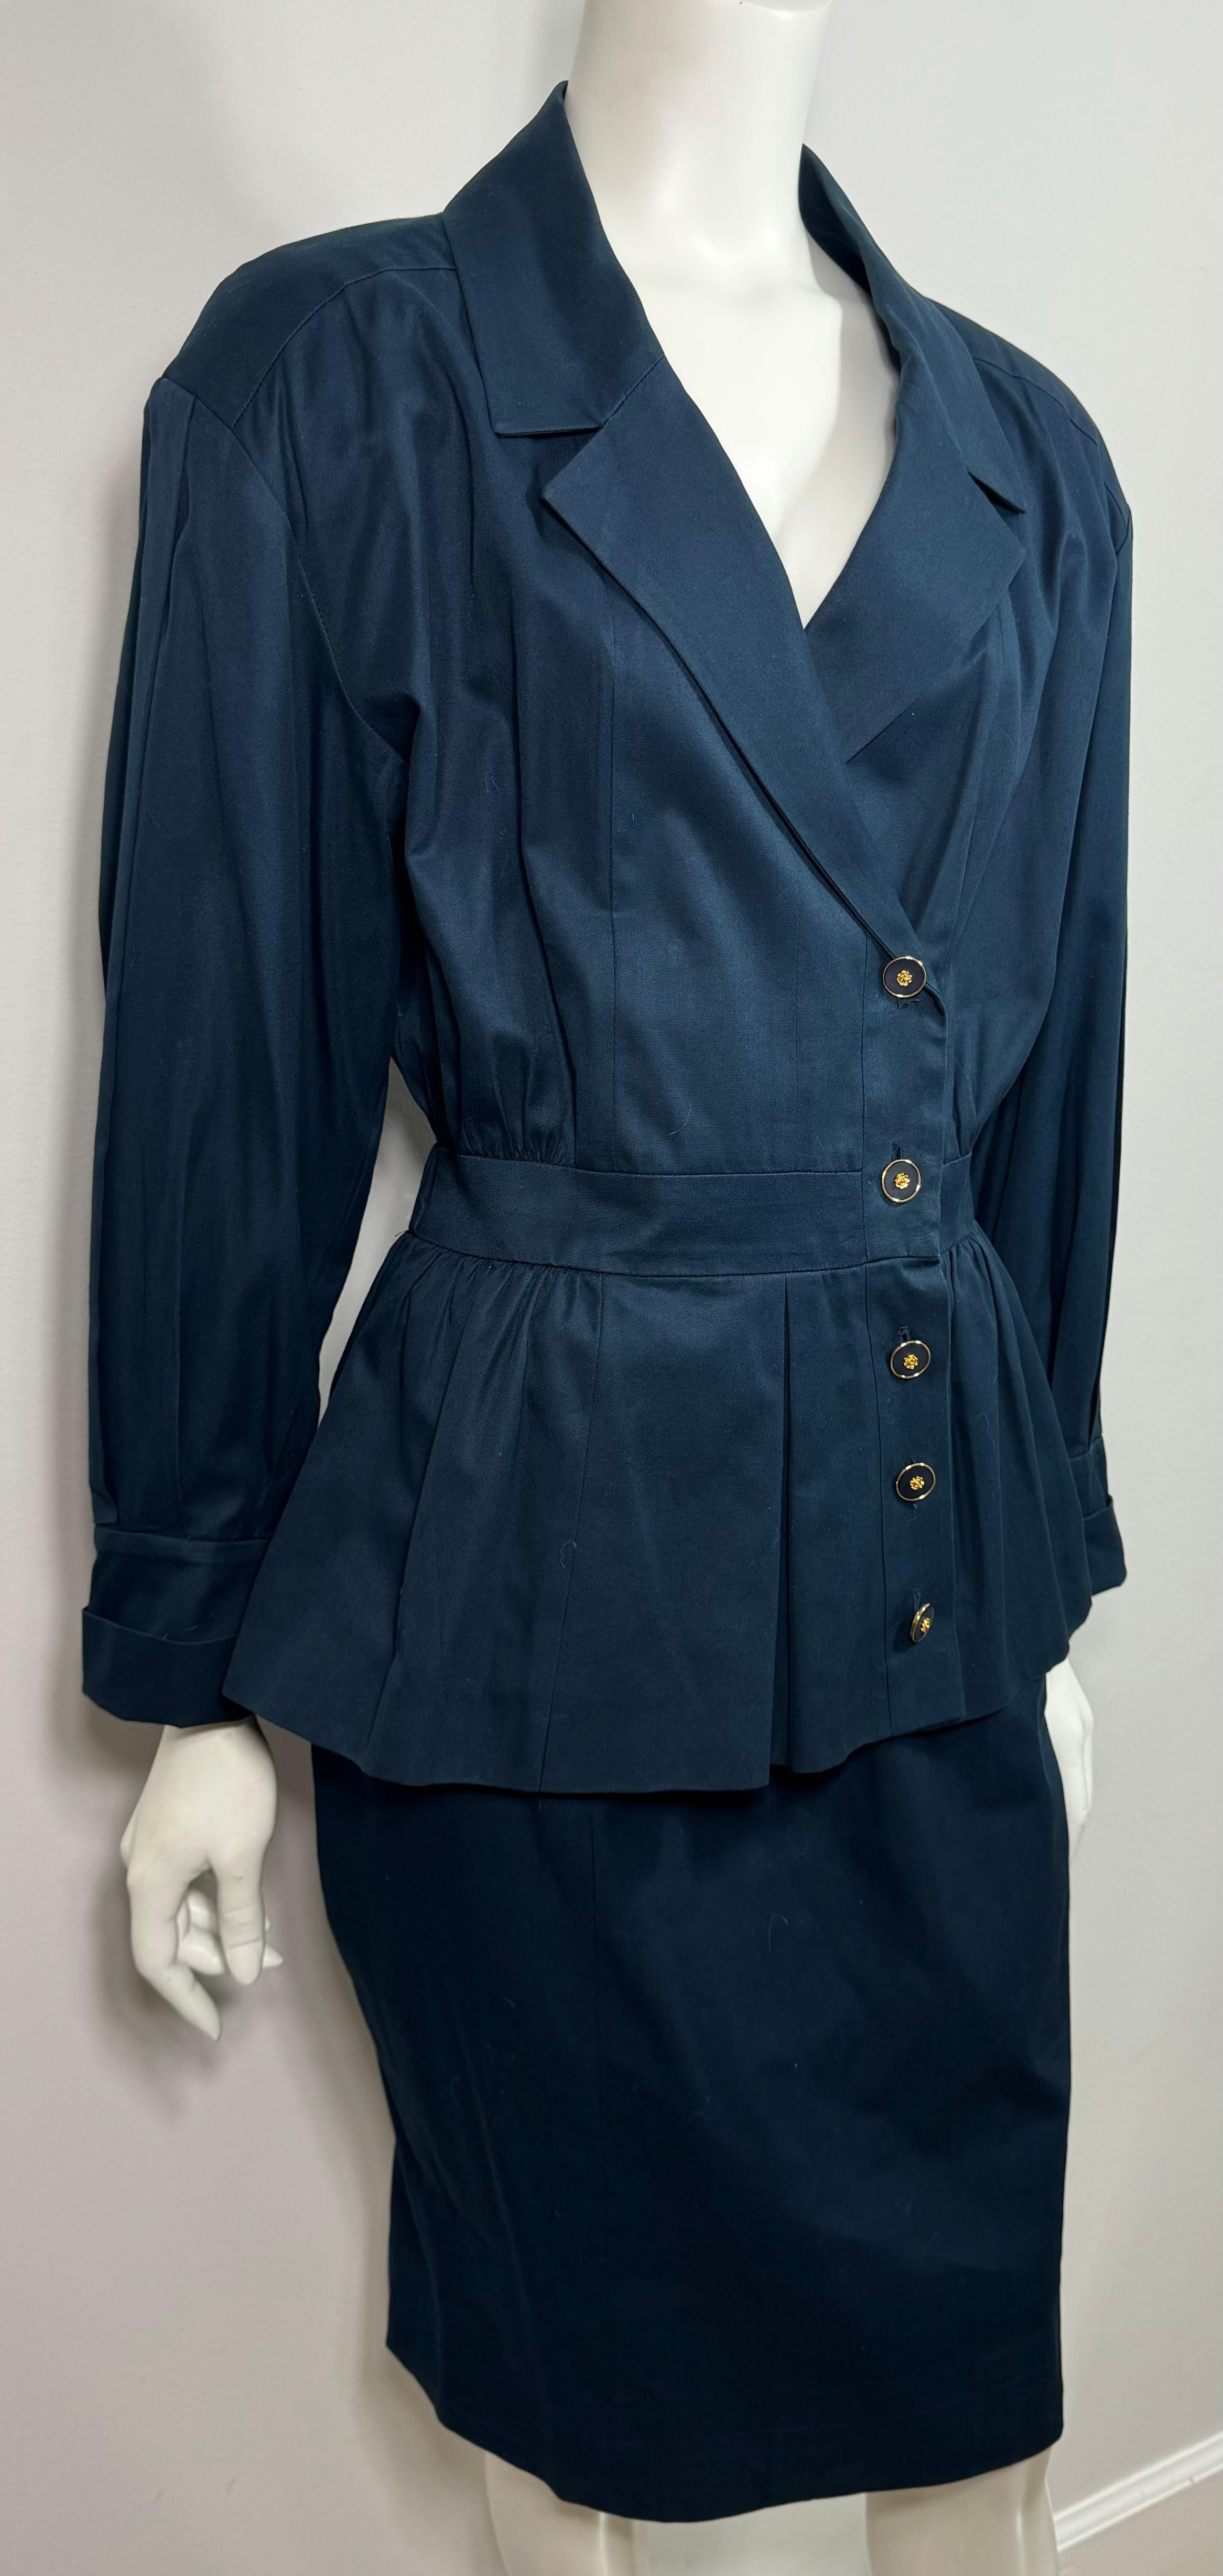 Chanel 1980's Navy Cotton Cinched Waist Jacket Skirt Suit - Size 38 For Sale 2